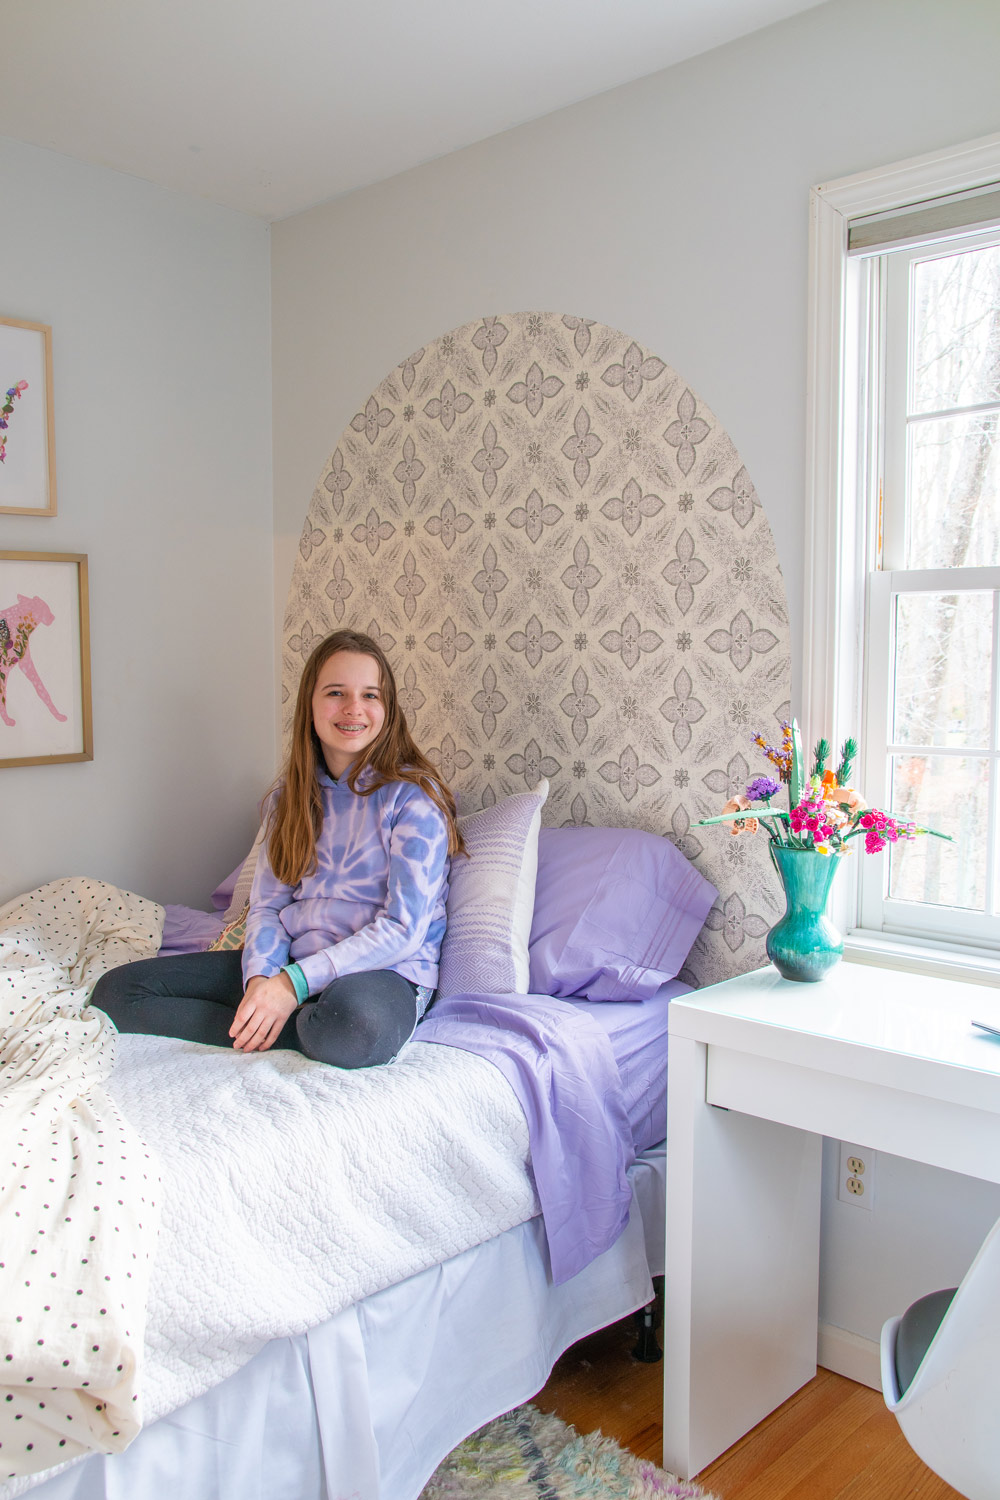 Girl sitting on her bed with wallpaper headboard.